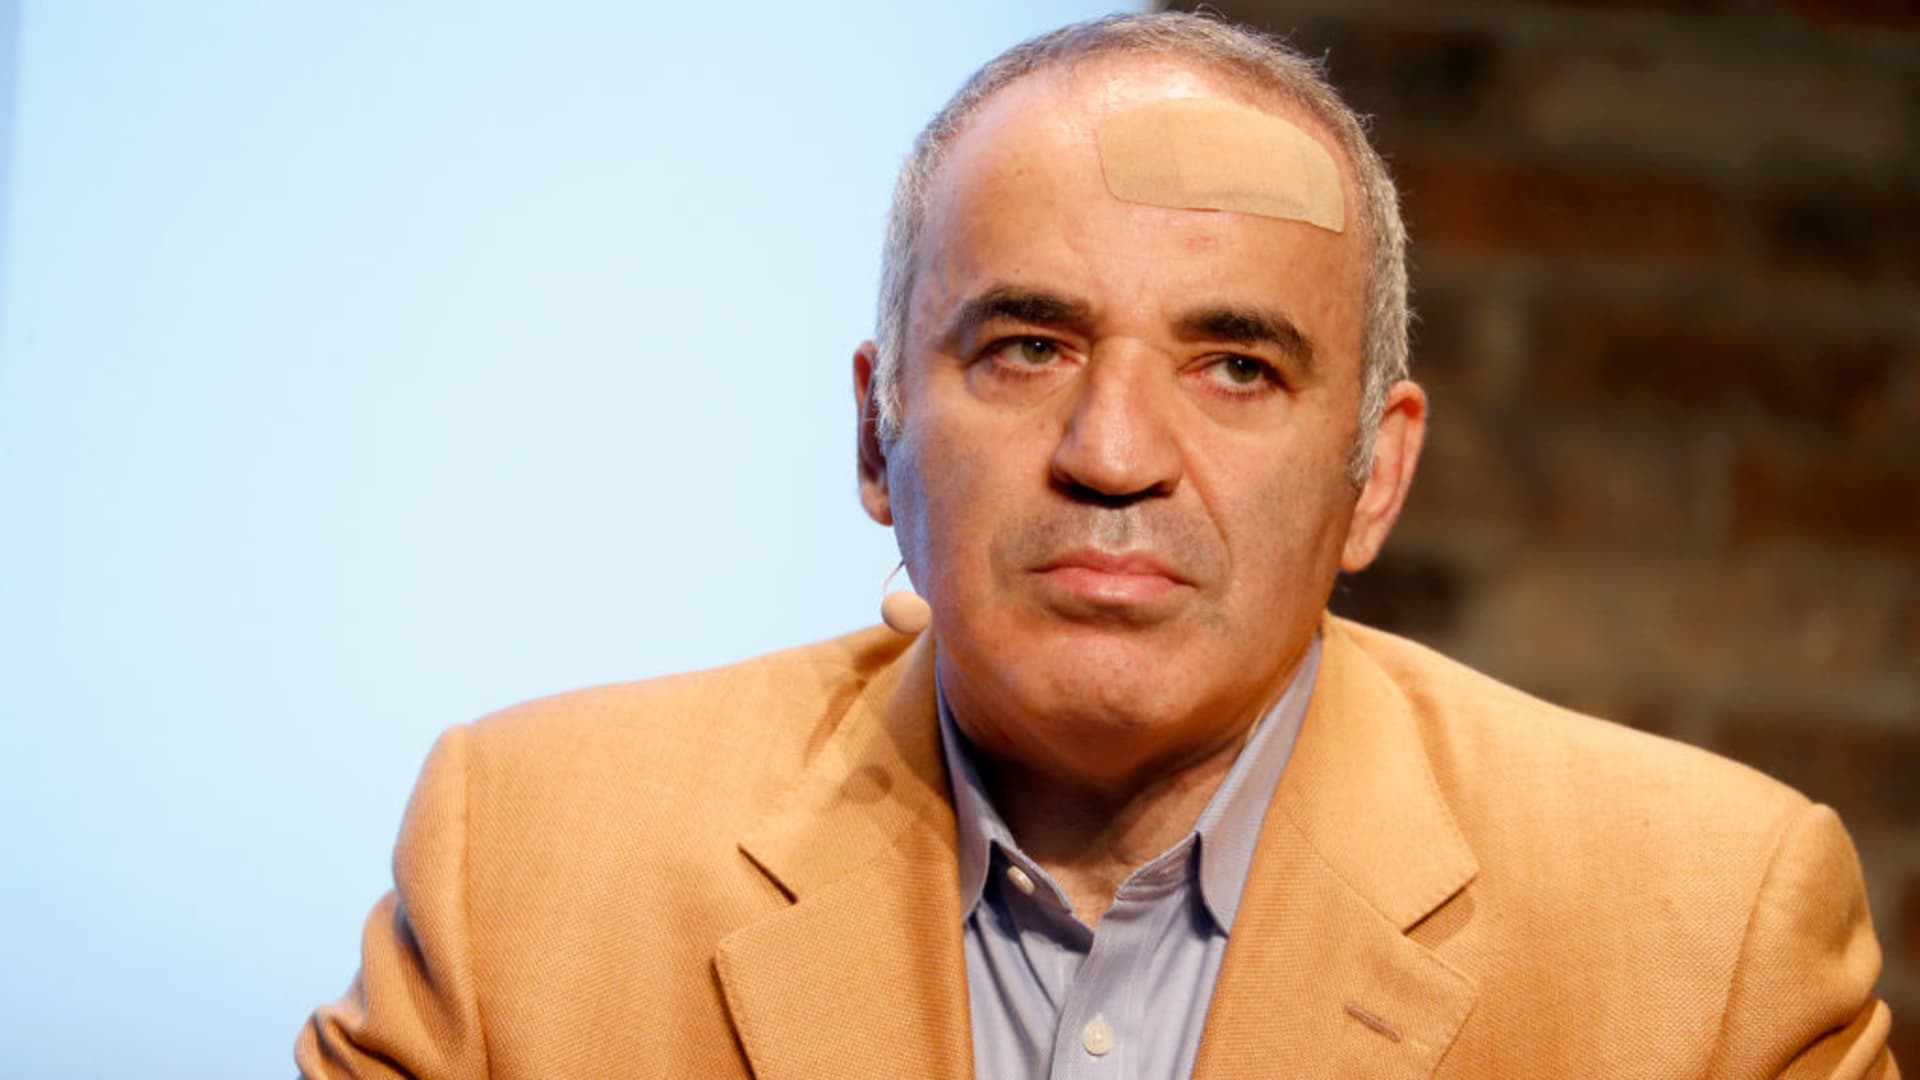 Chairman of the Human Rights Foundation and chess legend Garry Kasparov.